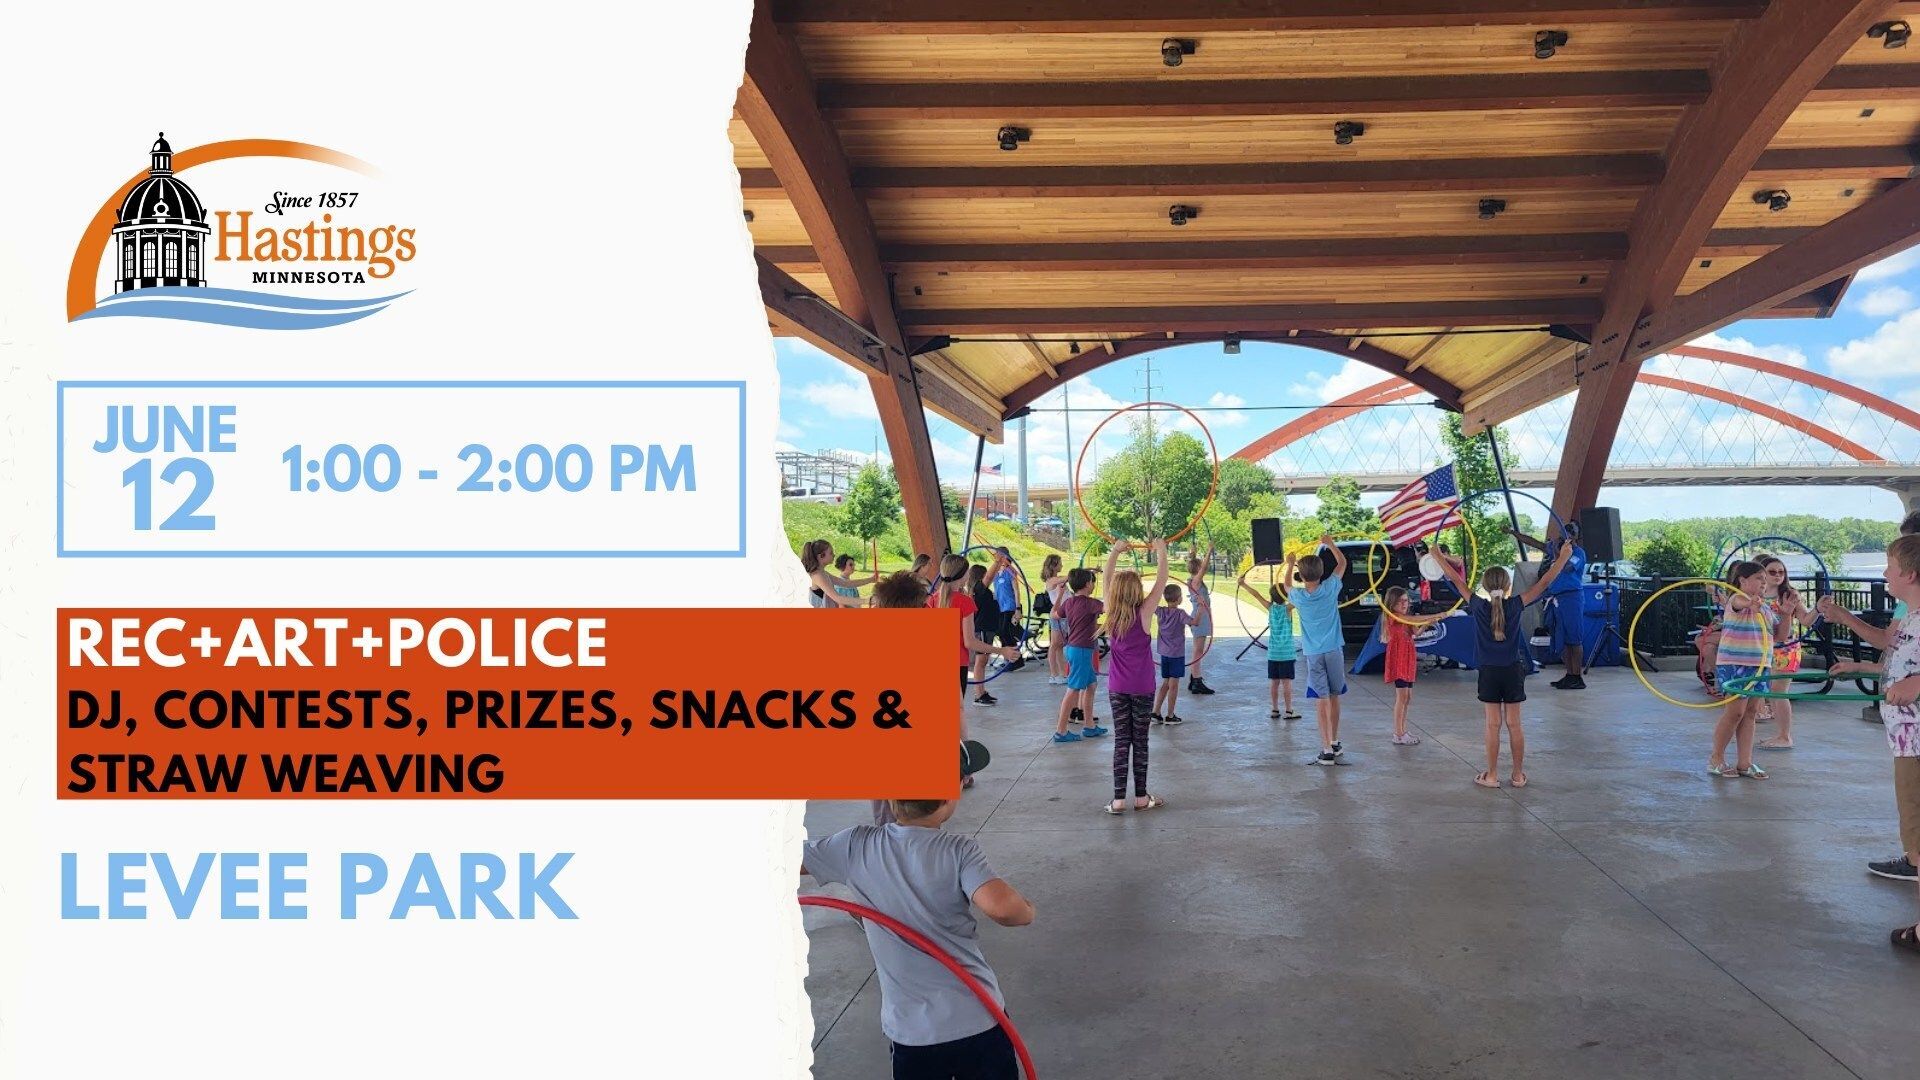 Kids hula hooping under the park pavilion and text DJ, contests, prizes, snacks, and straw weaving. City of Hastings logo and date June 12, 1 to 2 pm.